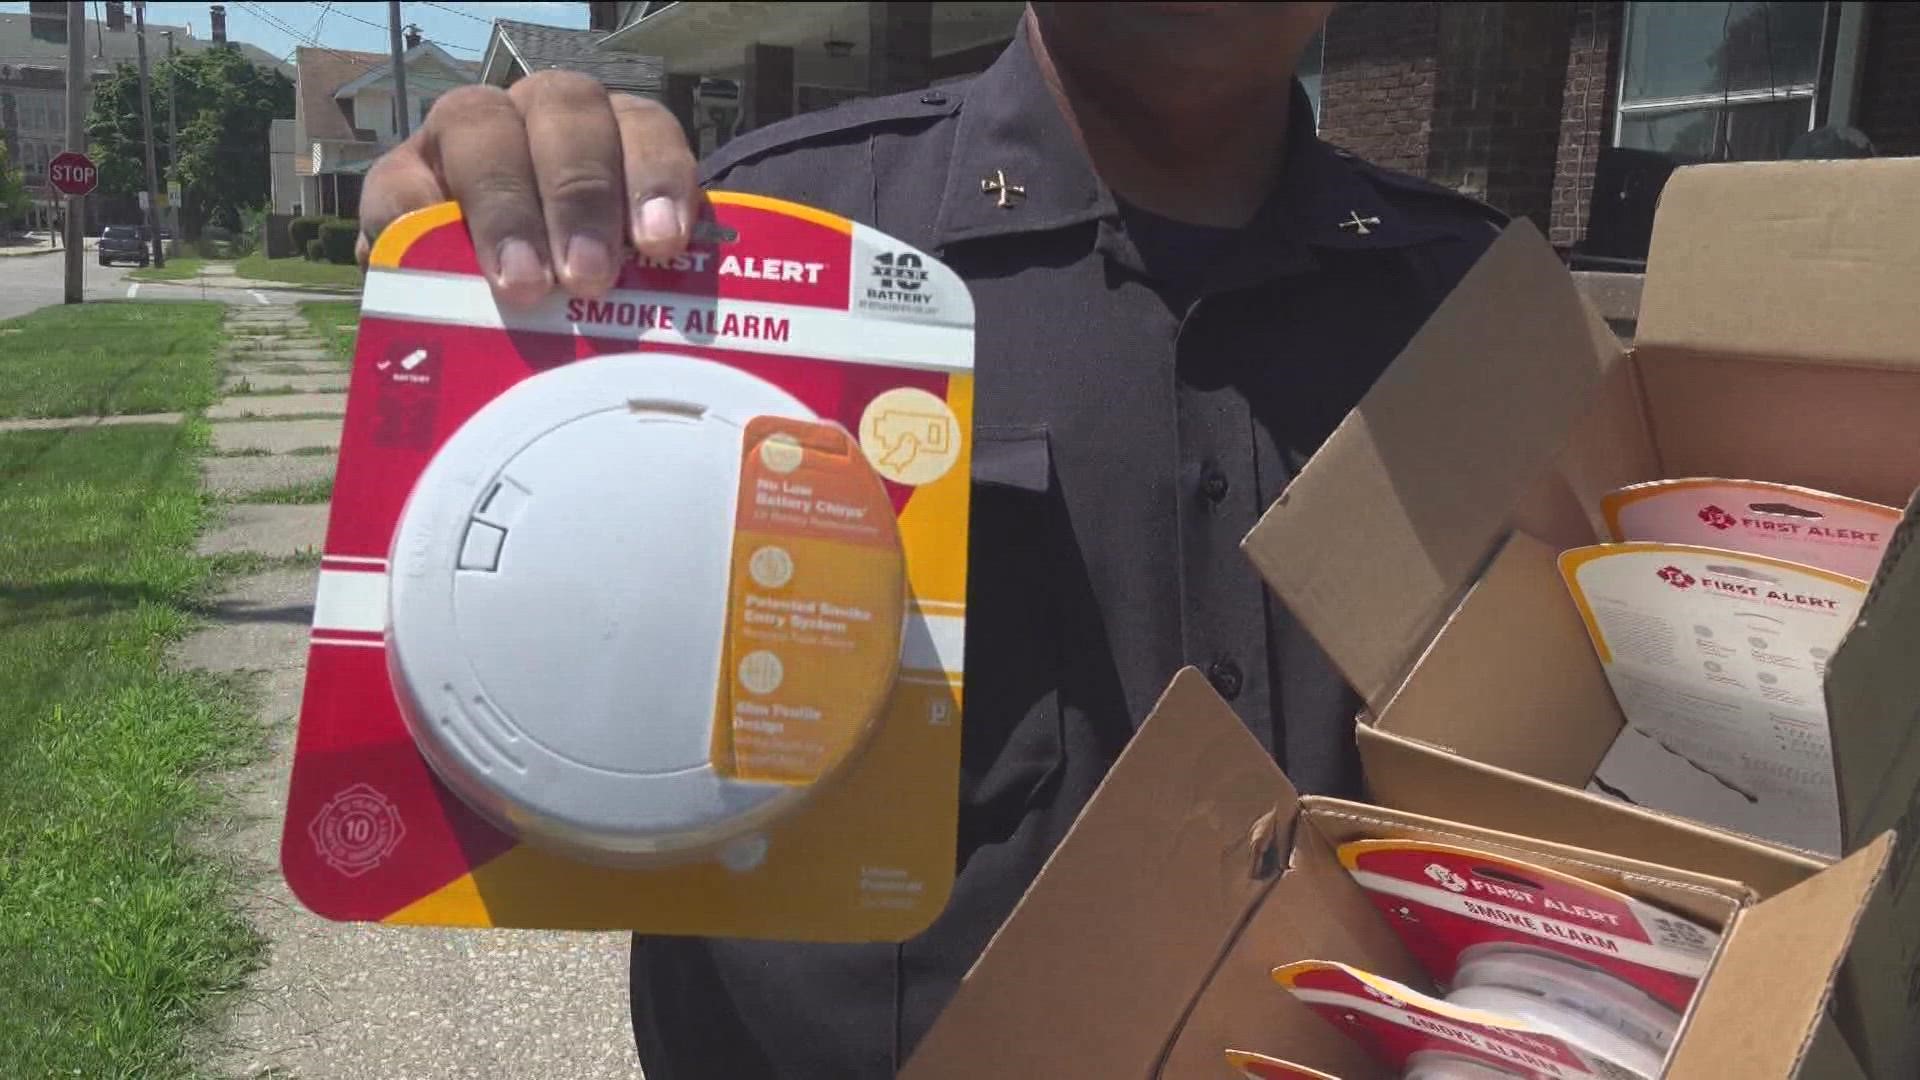 Toledo firefighters emphasized the importance of working smoke alarms.